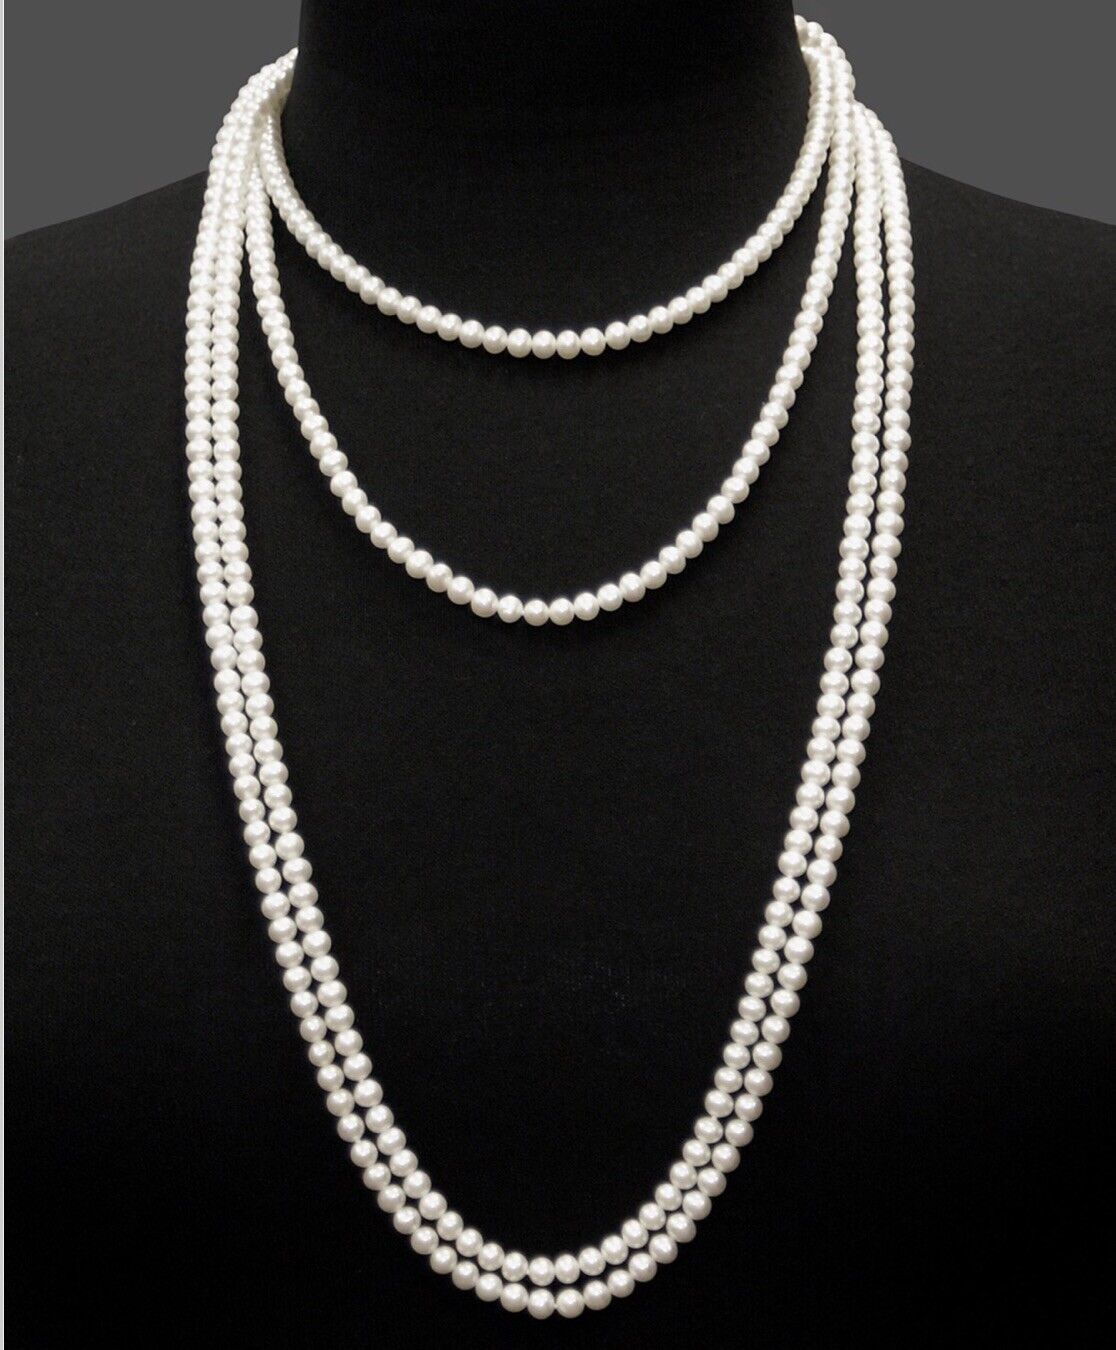 100” Strand Of 10.5mm Cultured Pearls. Very Good luster And Color. 